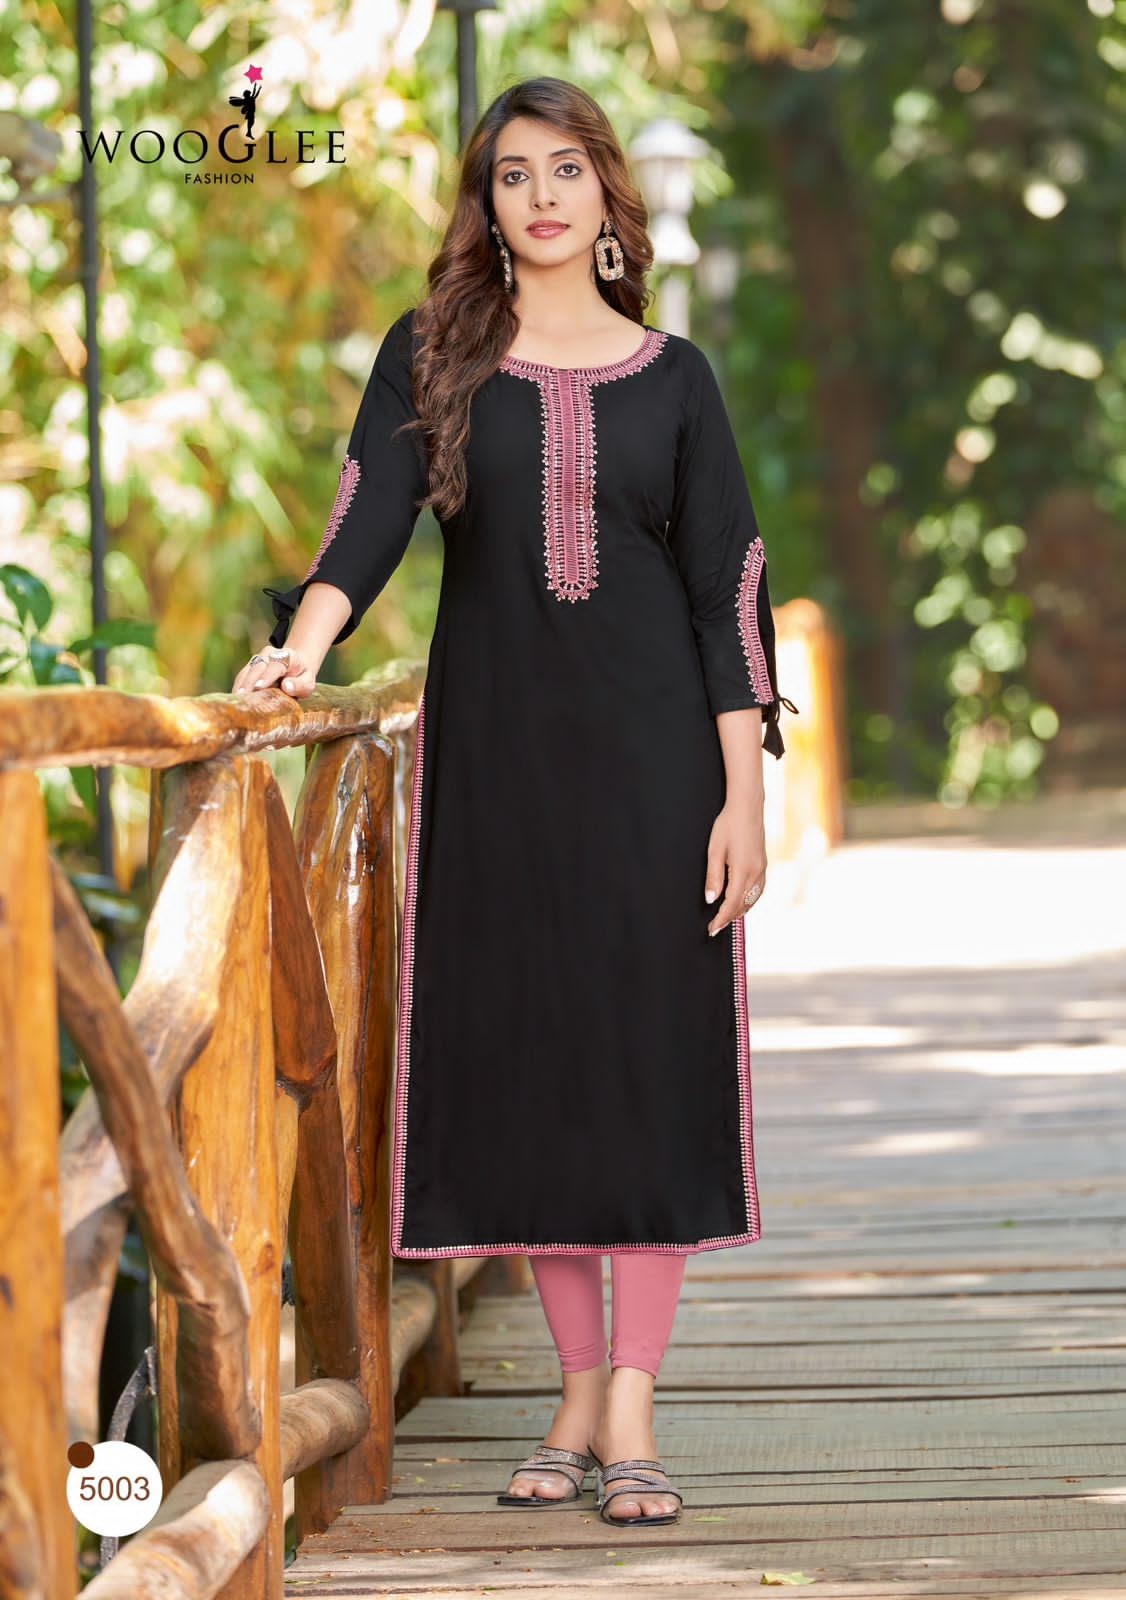 RamachandraN - Up your style game with some classy, elegant Kurtis. Shop  for the latest collection of trendy Kurtis from Ramachandran starting from  as low as ₹499/-. #Ramachandran #trivandrum #kurti #womenswear  #womensfashion #